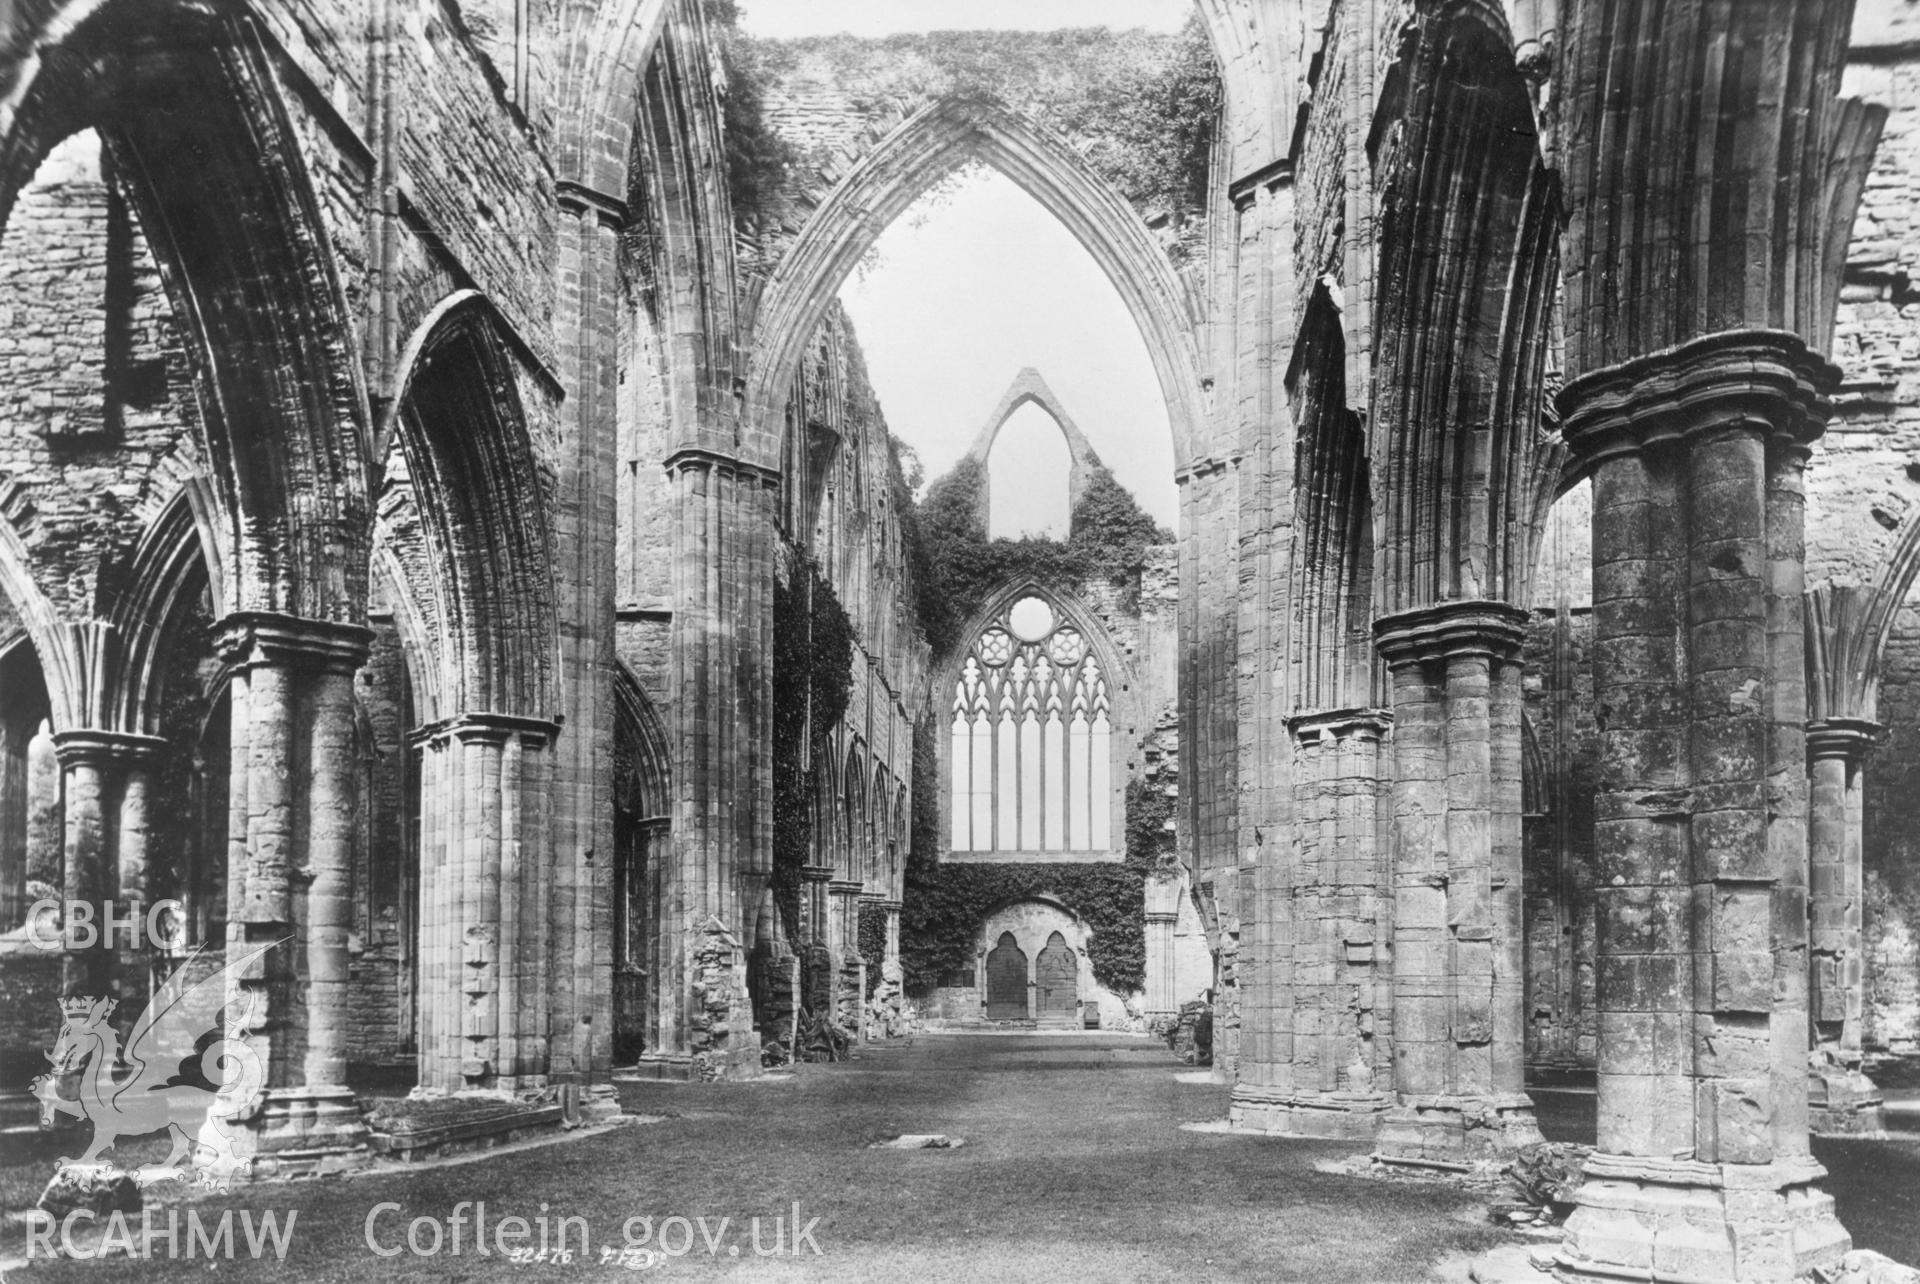 1 b/w print showing interior view of Tintern Abbey; collated by the former Central Office of Information.